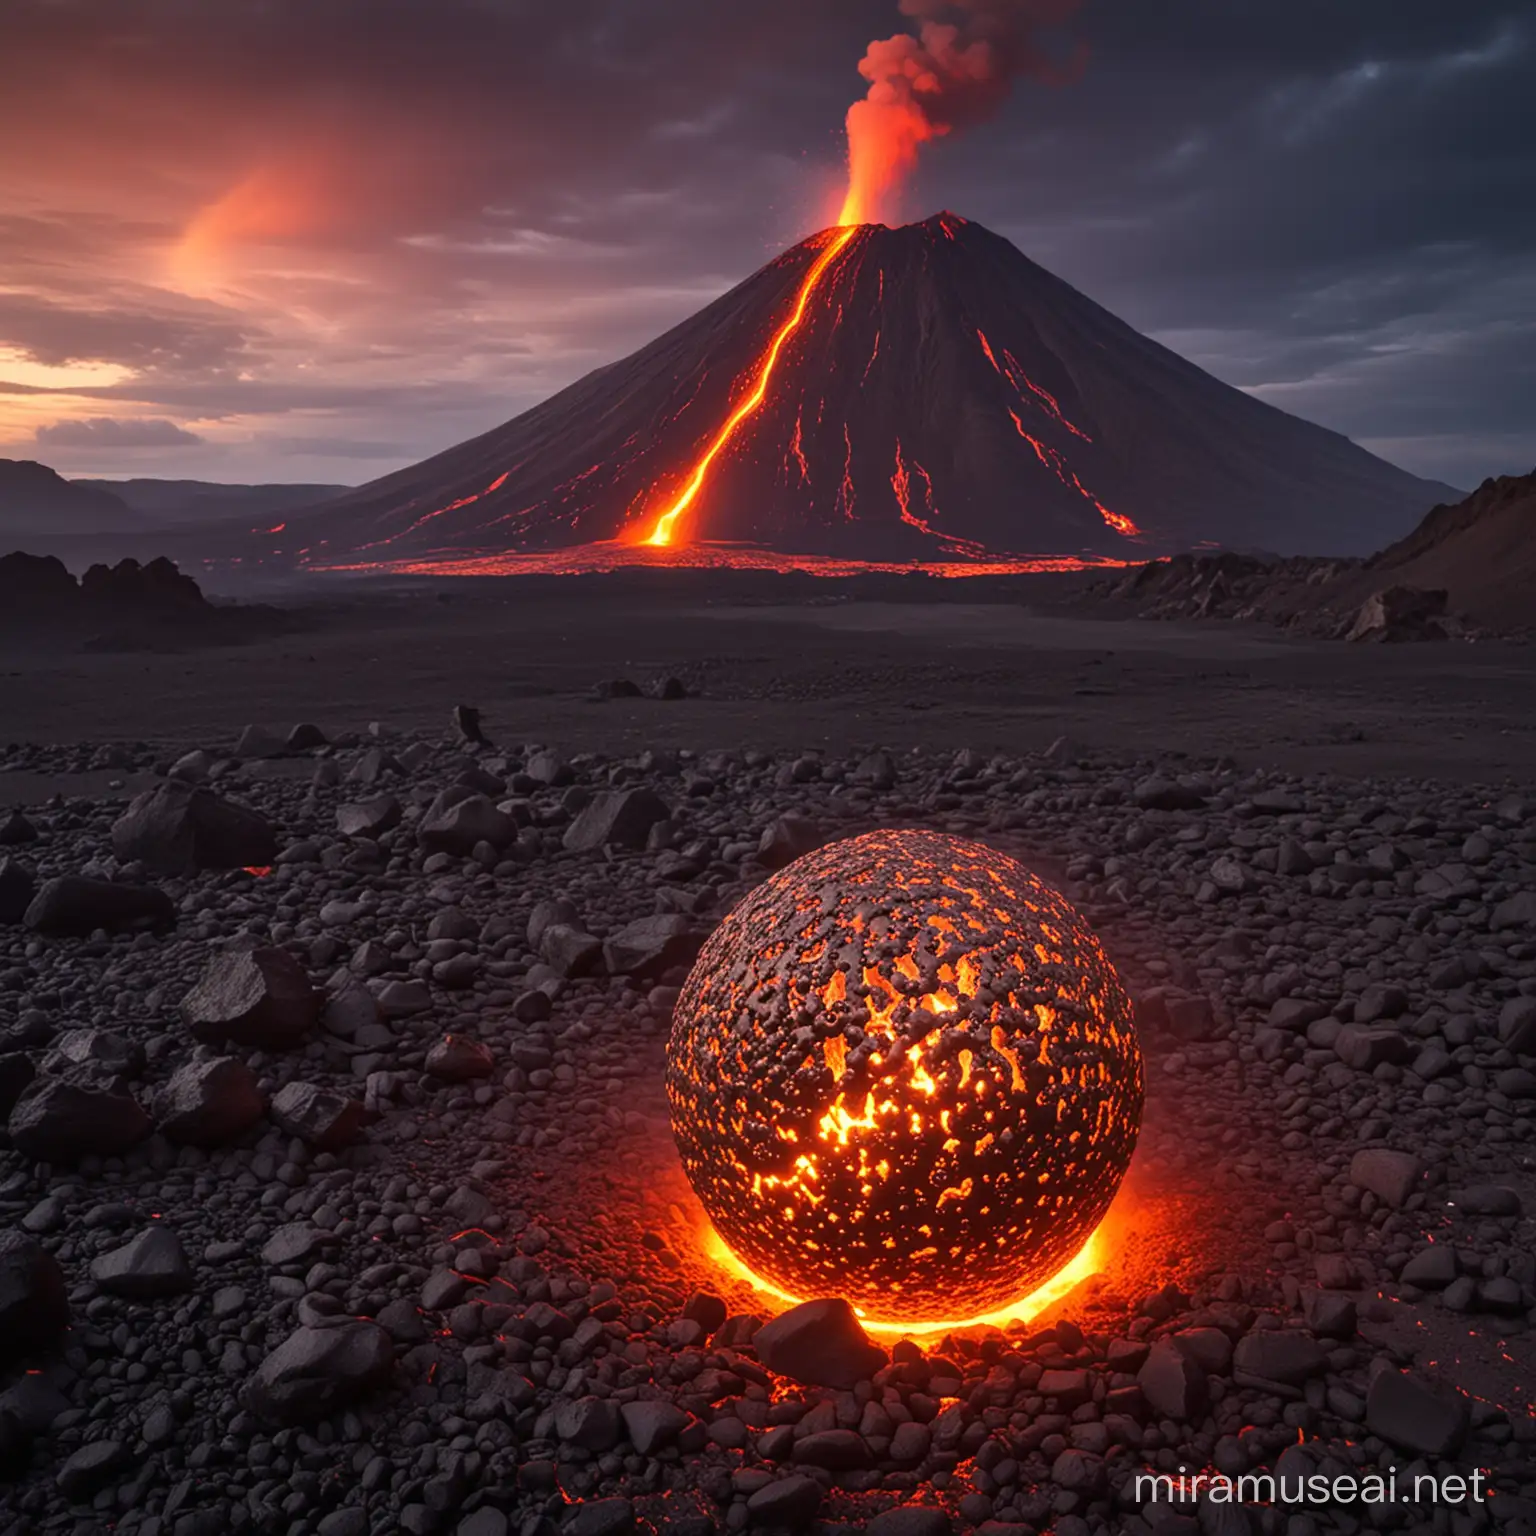 glowing steel ball, vulcano in the background with a lot of lava